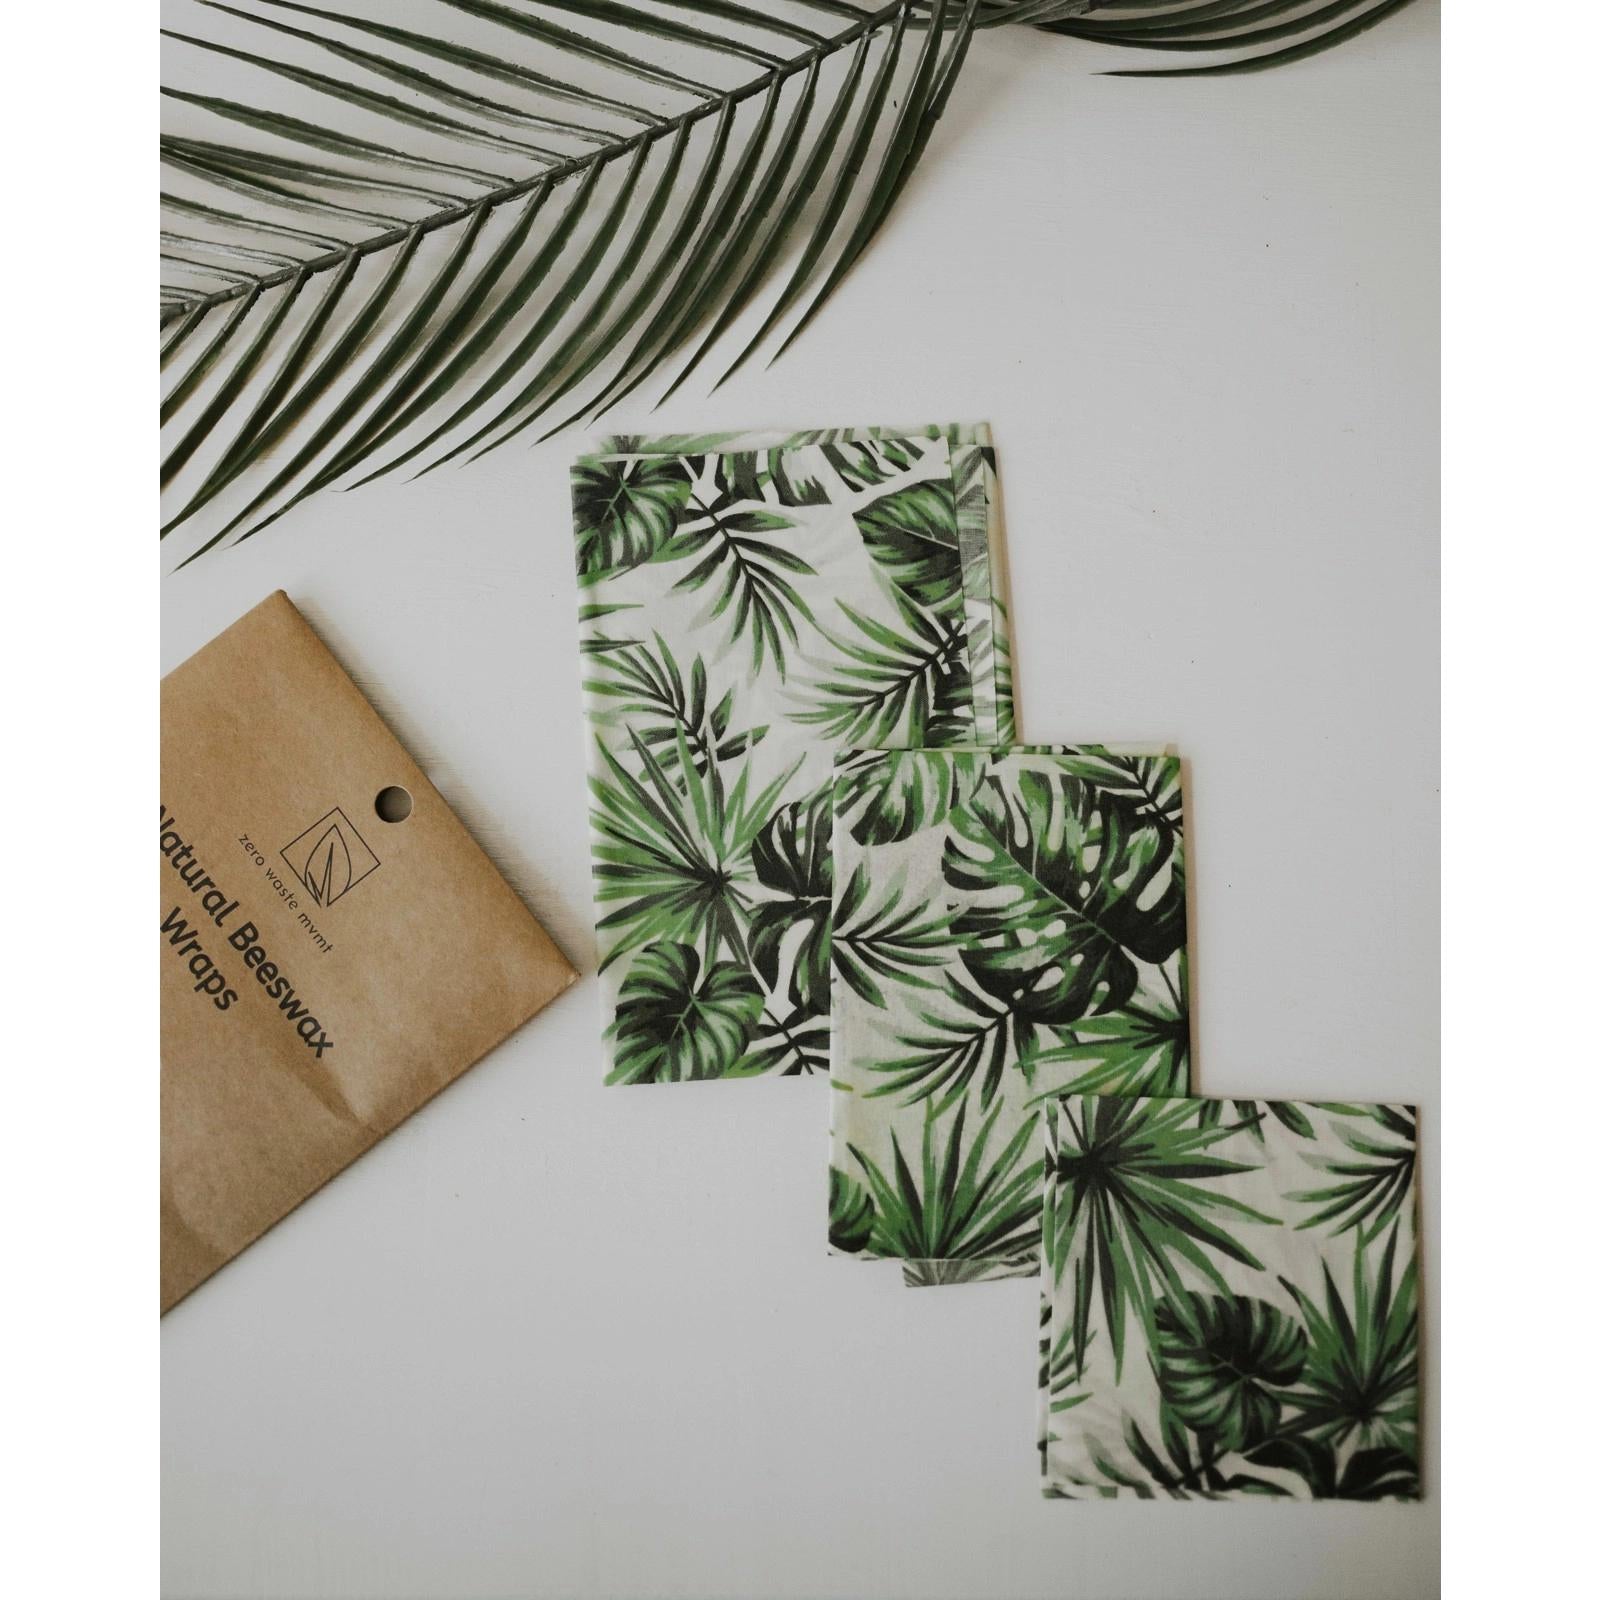 Beeswax Food Wrap (3 Pack) | Eco-friendly & Zero Waste